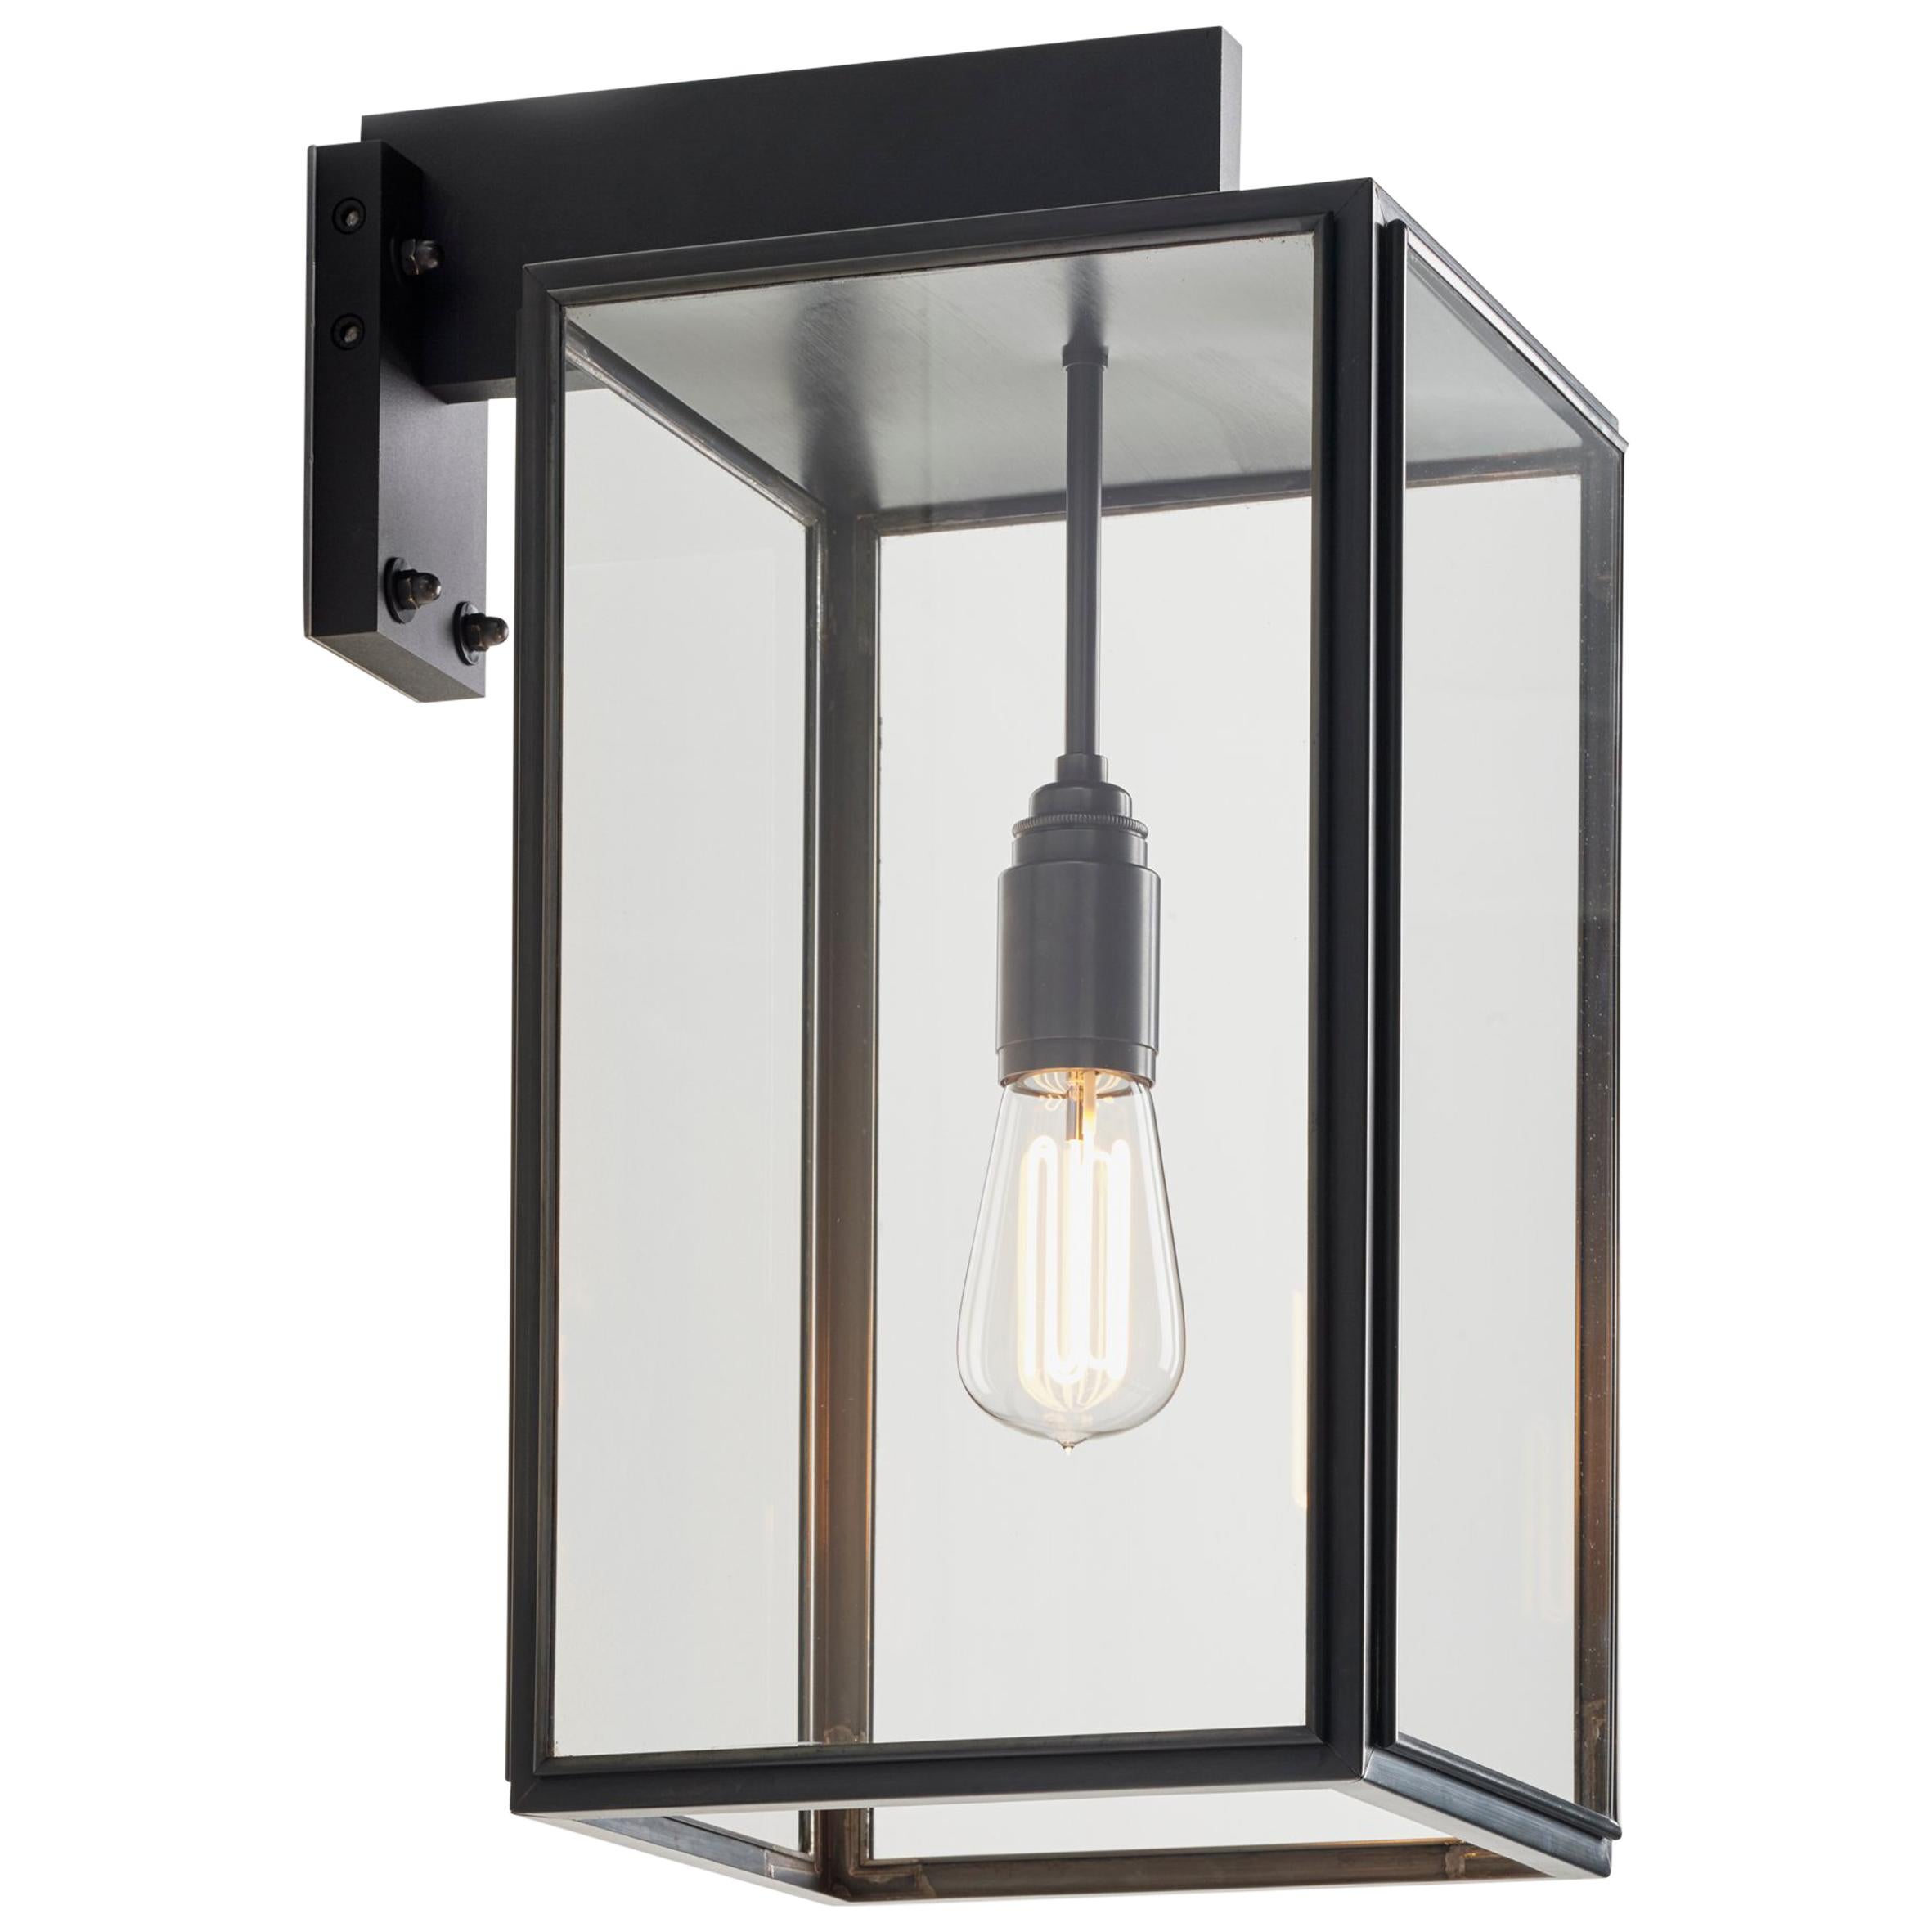 Tekna Ilford Wall-C Wall Light with Dark Bronze Finish and Clear Glass For Sale